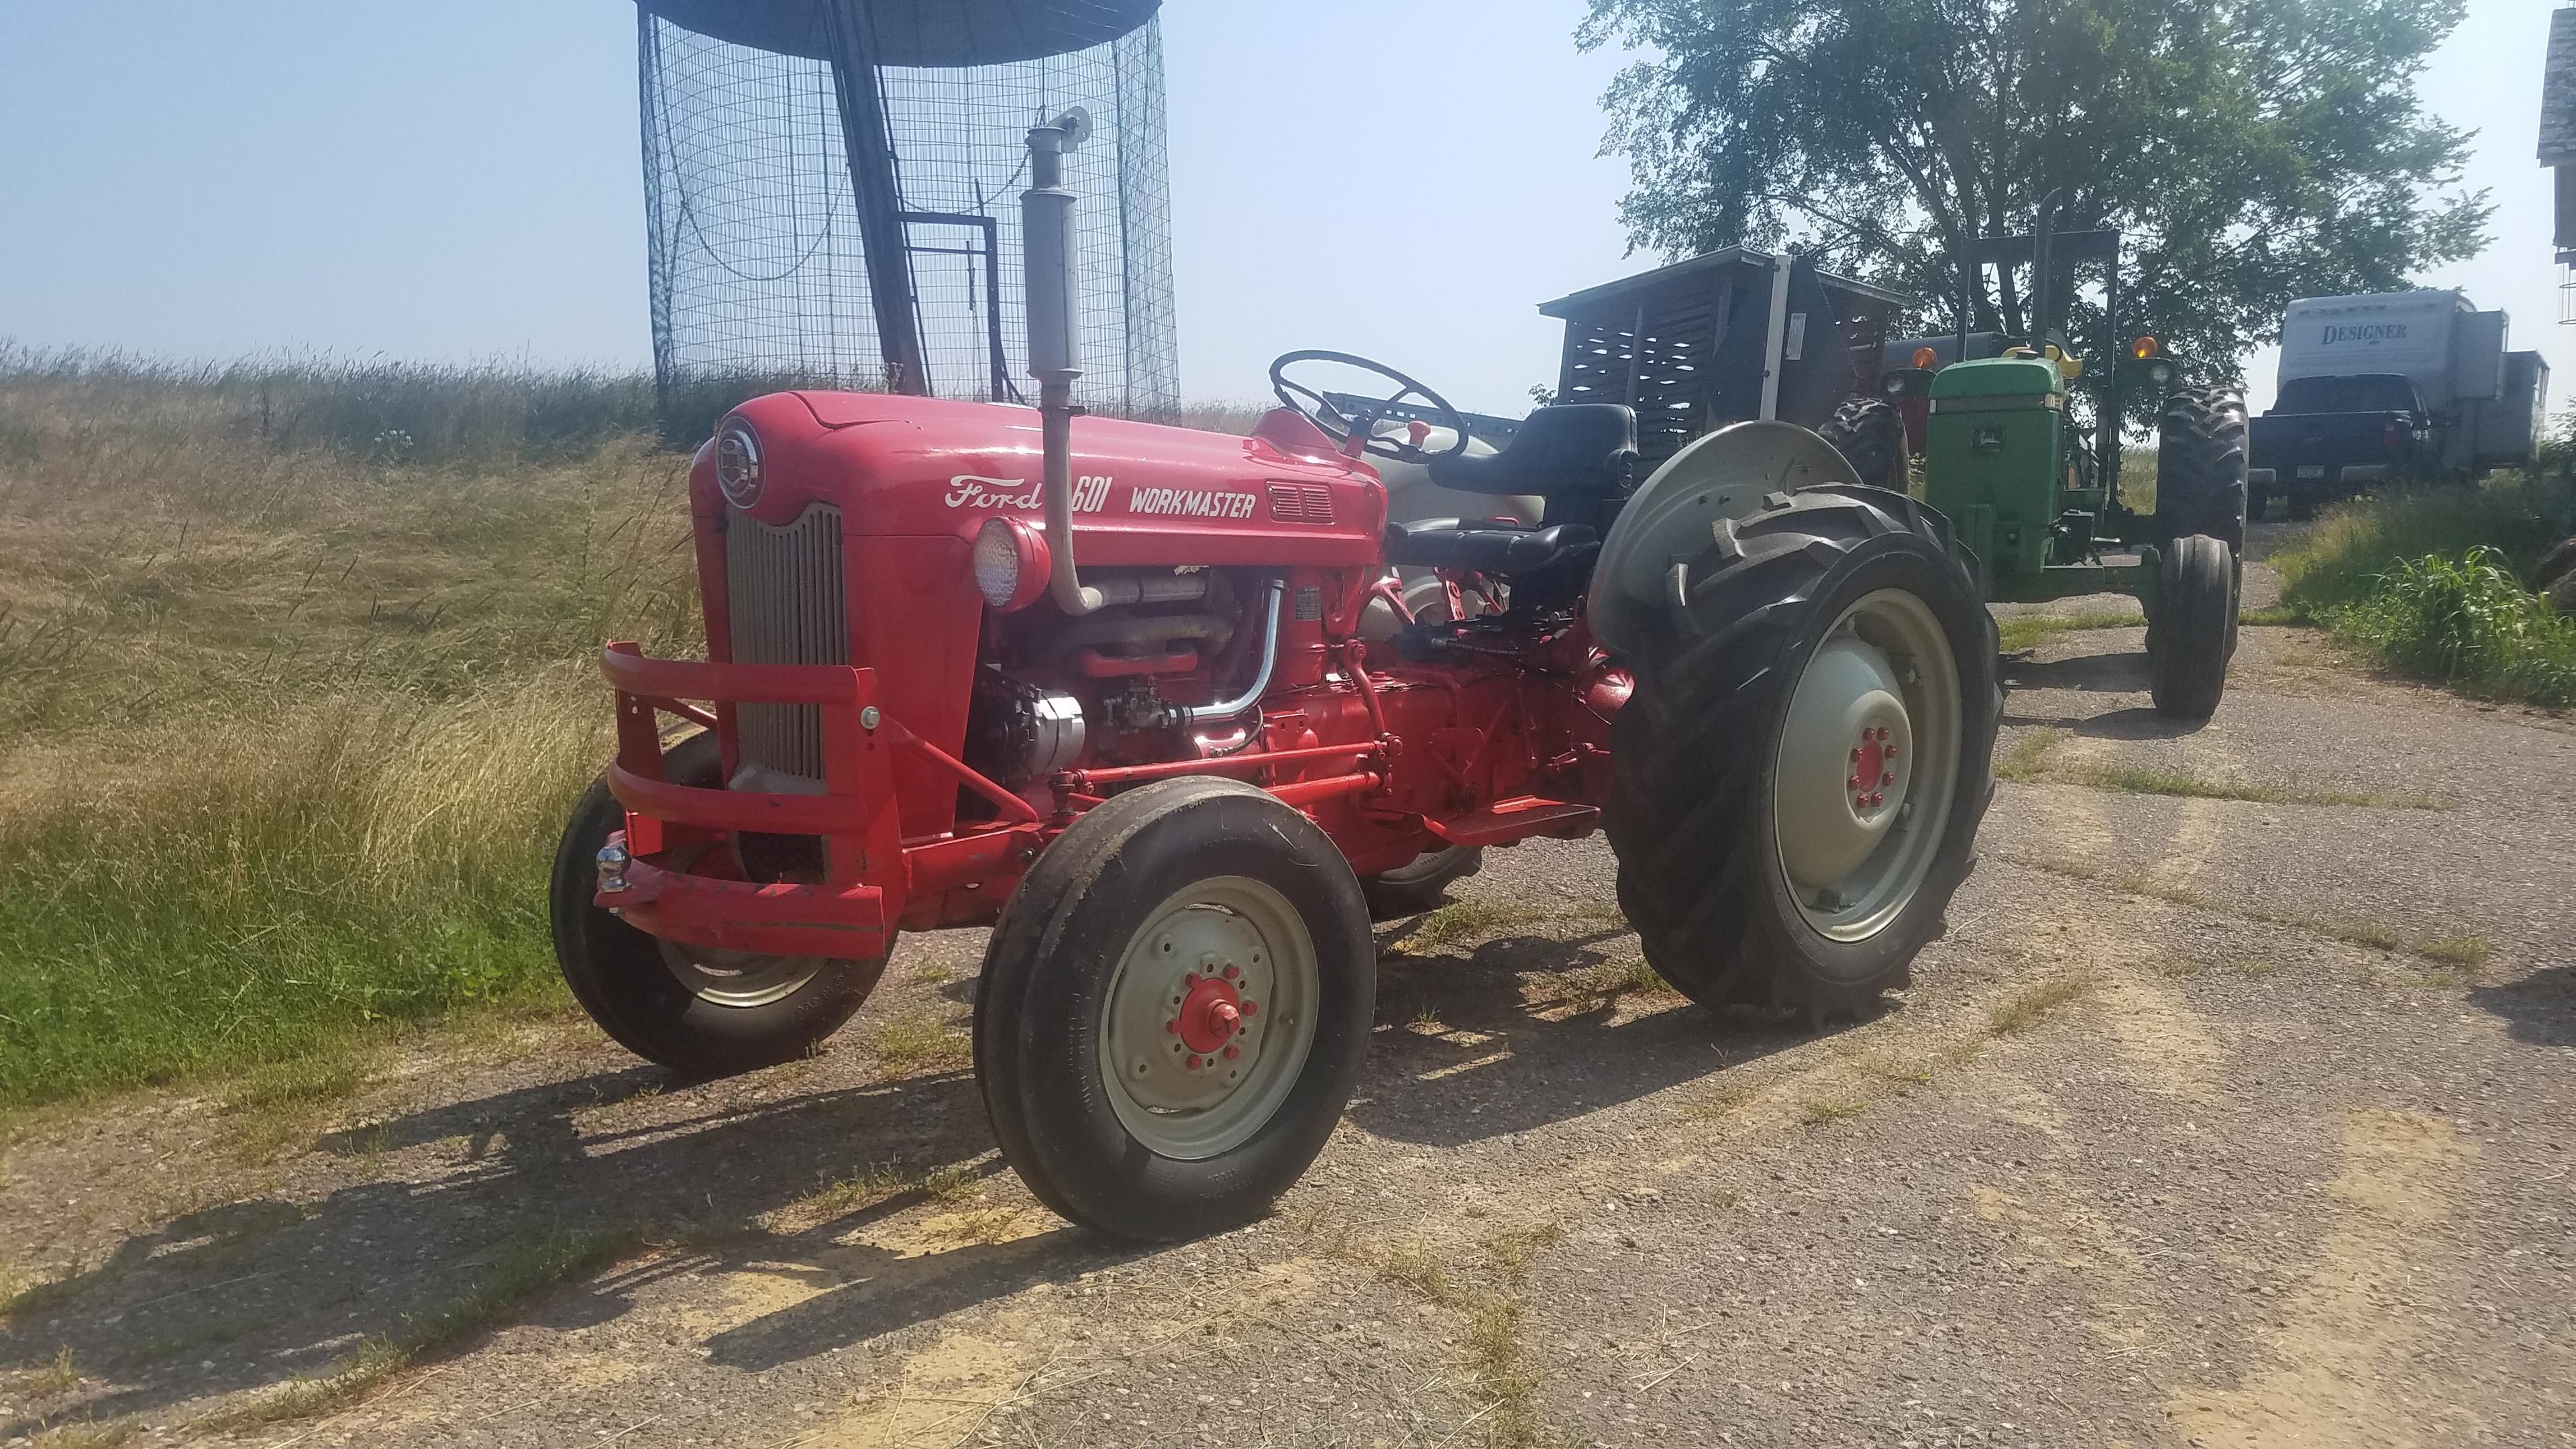 Ford 641 (Workmaster 601 series) s/n: 195476 1962 model. Restored to parade